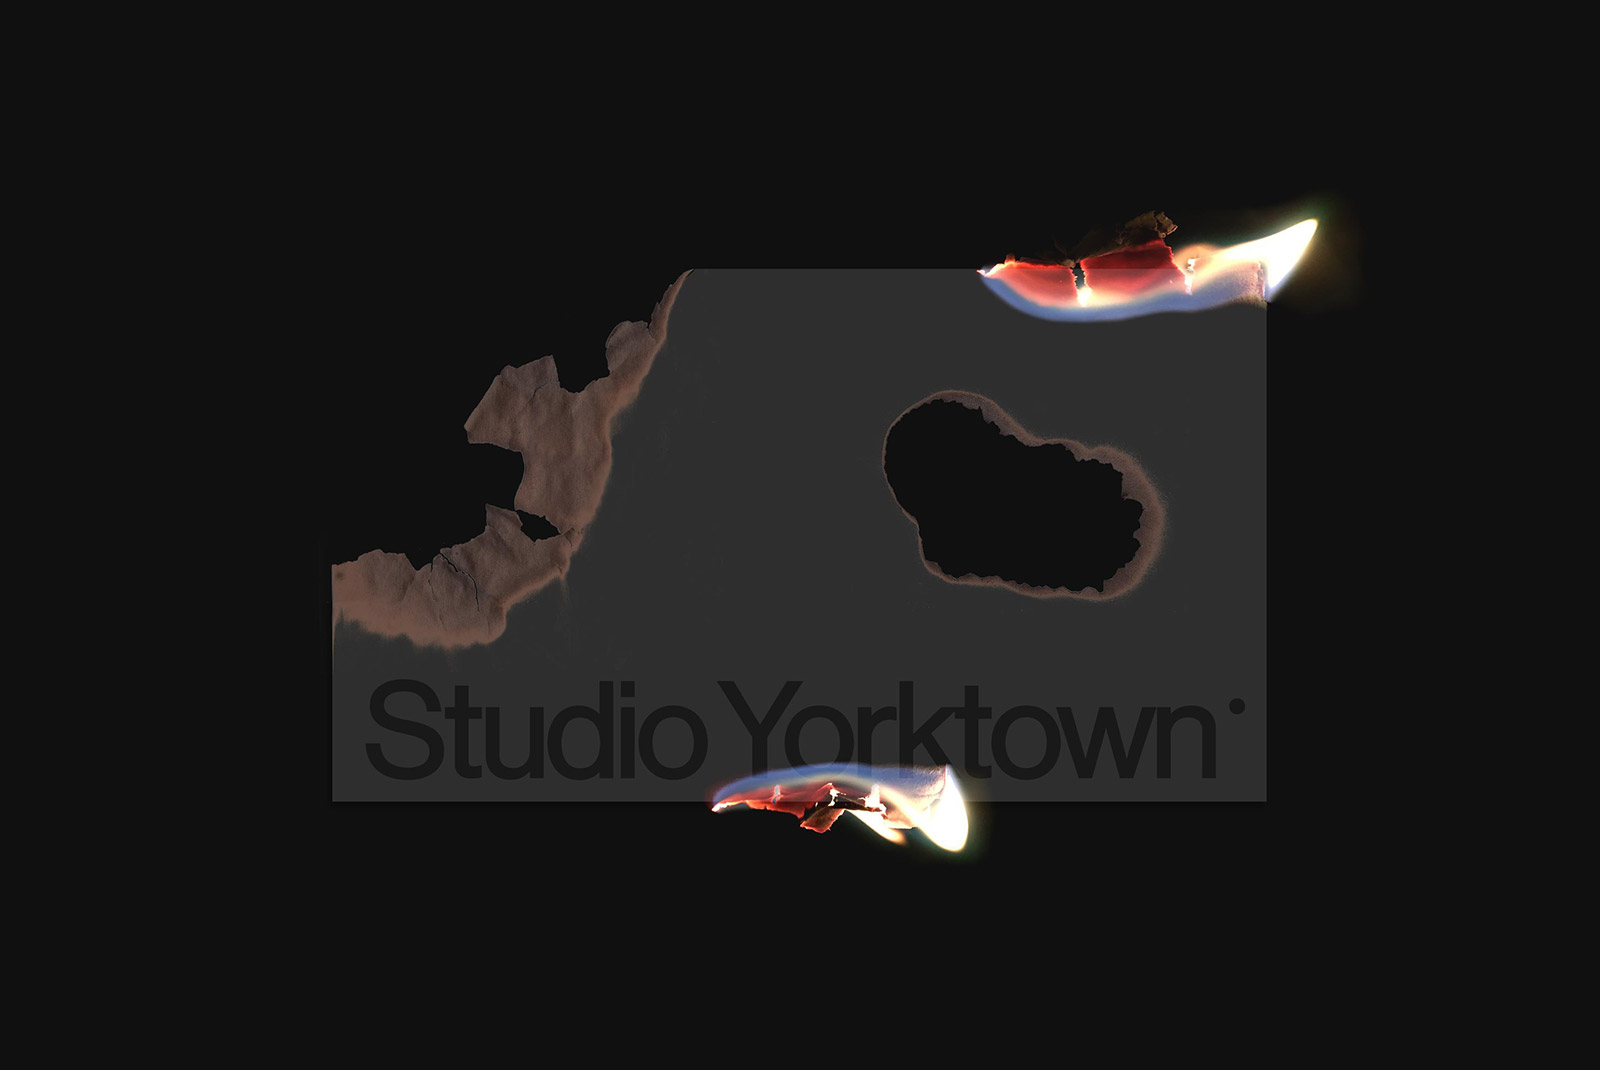 Creative paper burn effect mockup with dynamic flame textures highlighting the Studio Yorktown logo, ideal for presentations, digital art.